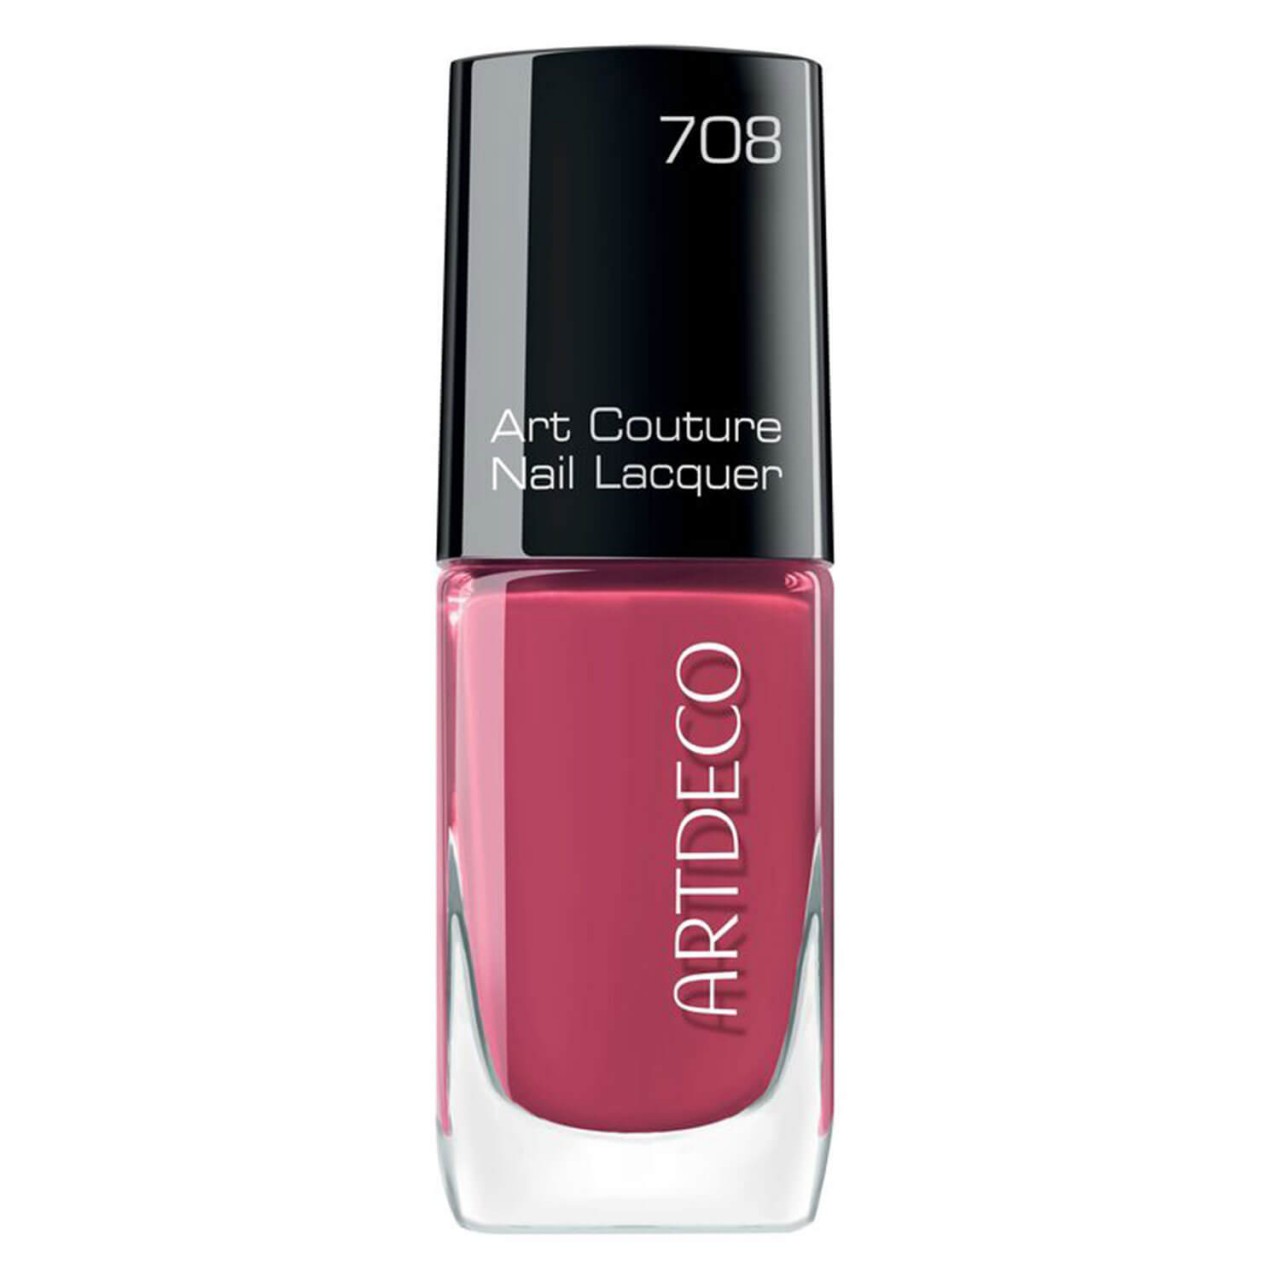 Art Couture - Nail Lacquer Blooming Day 708 von Artdeco